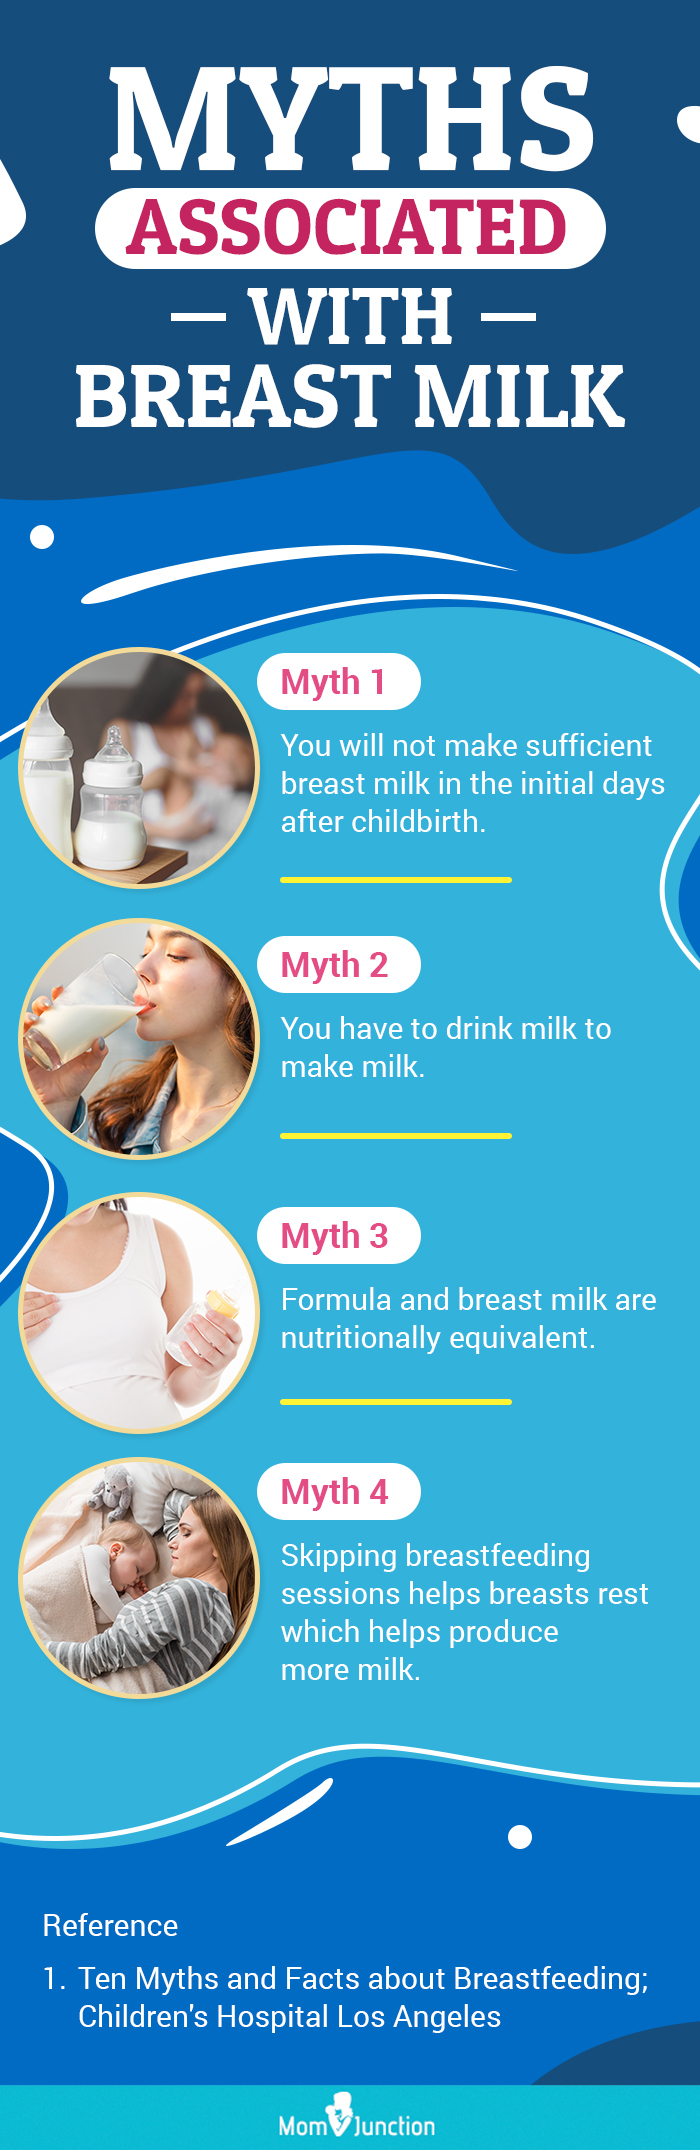 myths associated with breast milk [infographic]